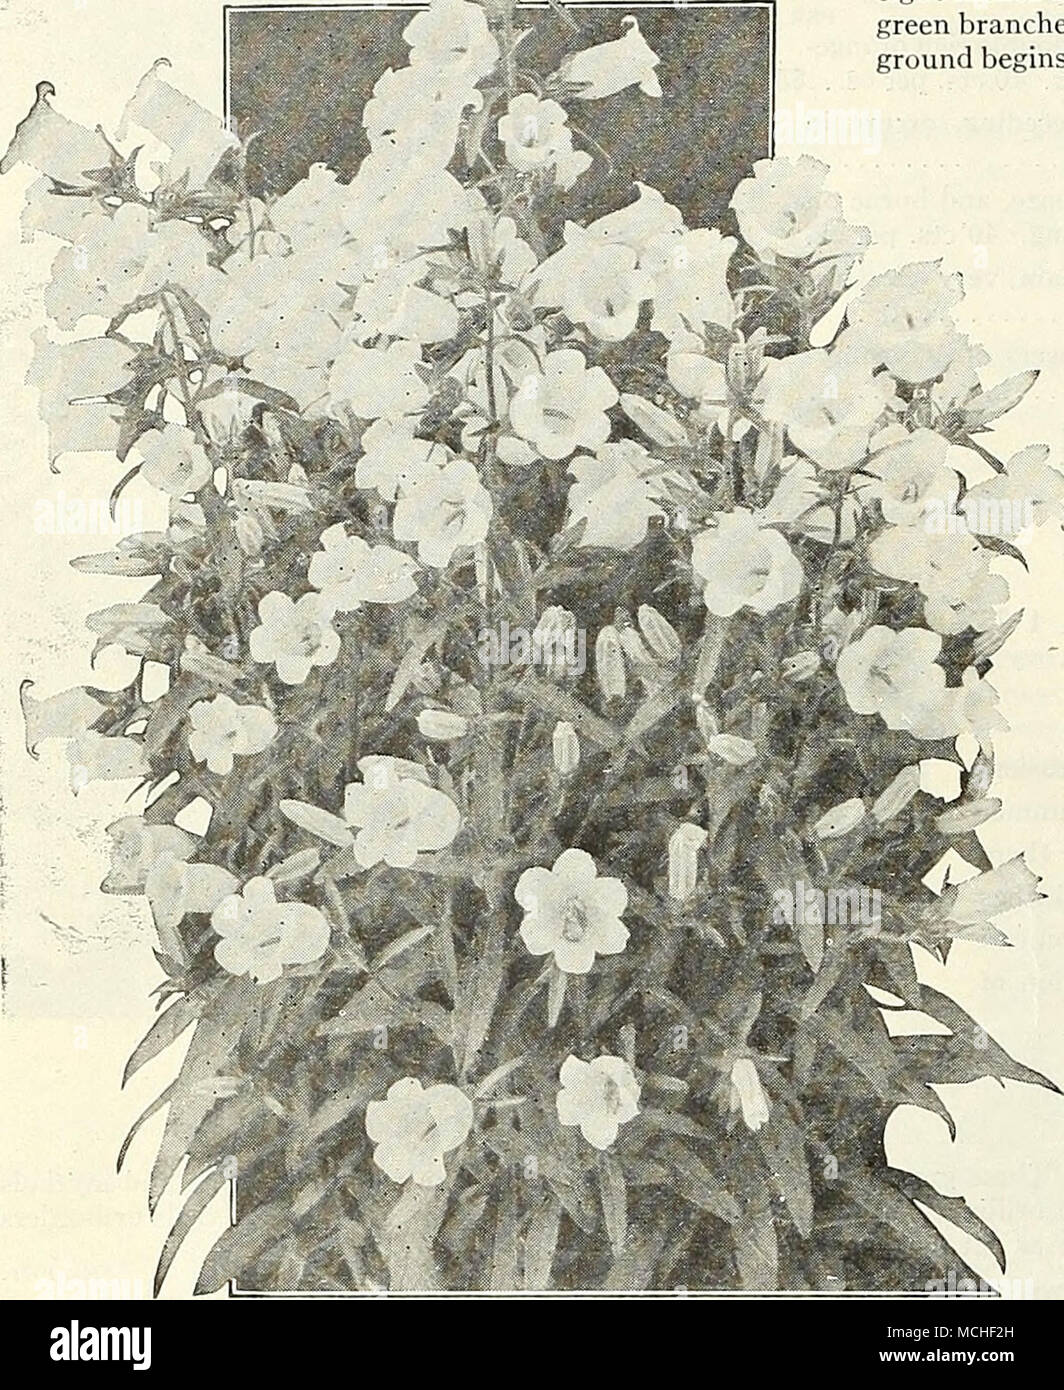 . Cup and Saucer Canterbury Bells {Campanula, medium calycanlhema). This is unquestionably the finest type of this old-fashioned and much prized garden plant. They differ from the ordinary type in having an extra large calyx, which is of the same color as the flower, giving the appearance of a cup and saucer. They are effective either in the garden or grown in pots for conservatpry or table decoration. We offer them in separate colors, as well as in mixture, viz.: PER PKT. 1735 Calycanthema Blue. A fine clear shade-IO 15 15 15 1736 â Rose Pink. Delicate rosy-pink. 1738 â White. Pure white 1739 Stock Photo